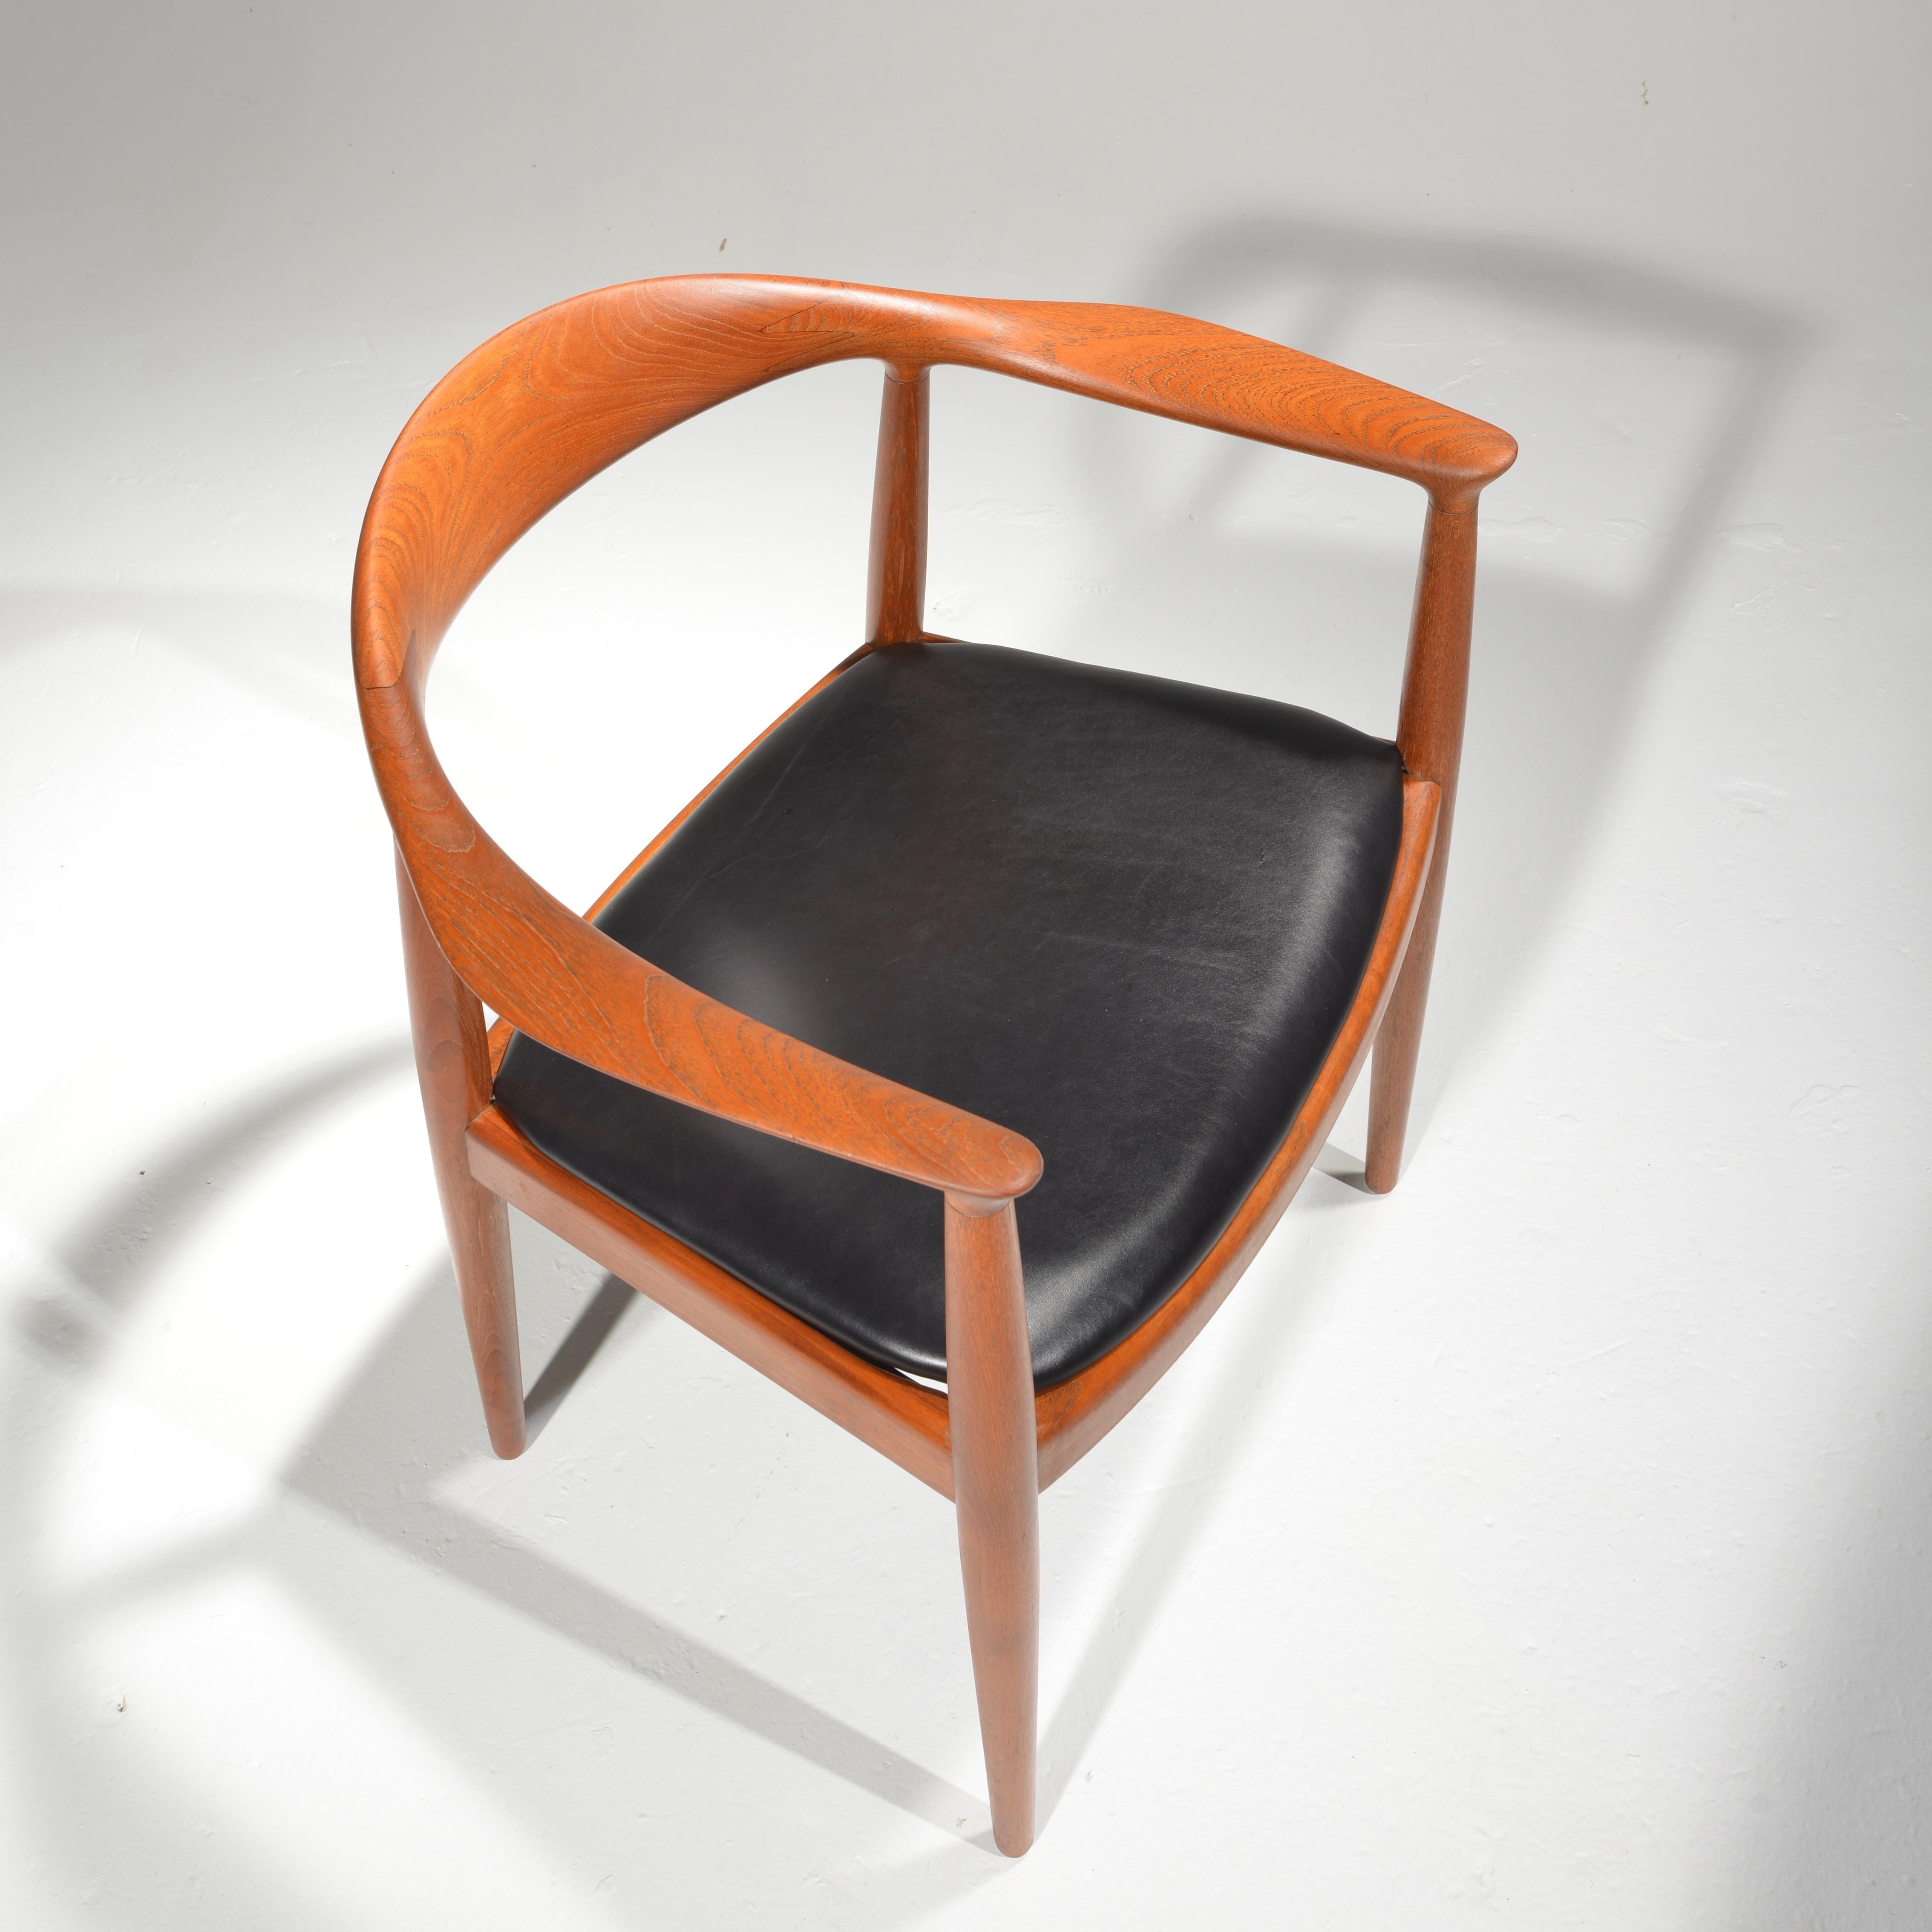 10 Hans Wegner for Johannes Hansen JH-503 Chairs in Teak and Leather In Good Condition For Sale In Los Angeles, CA